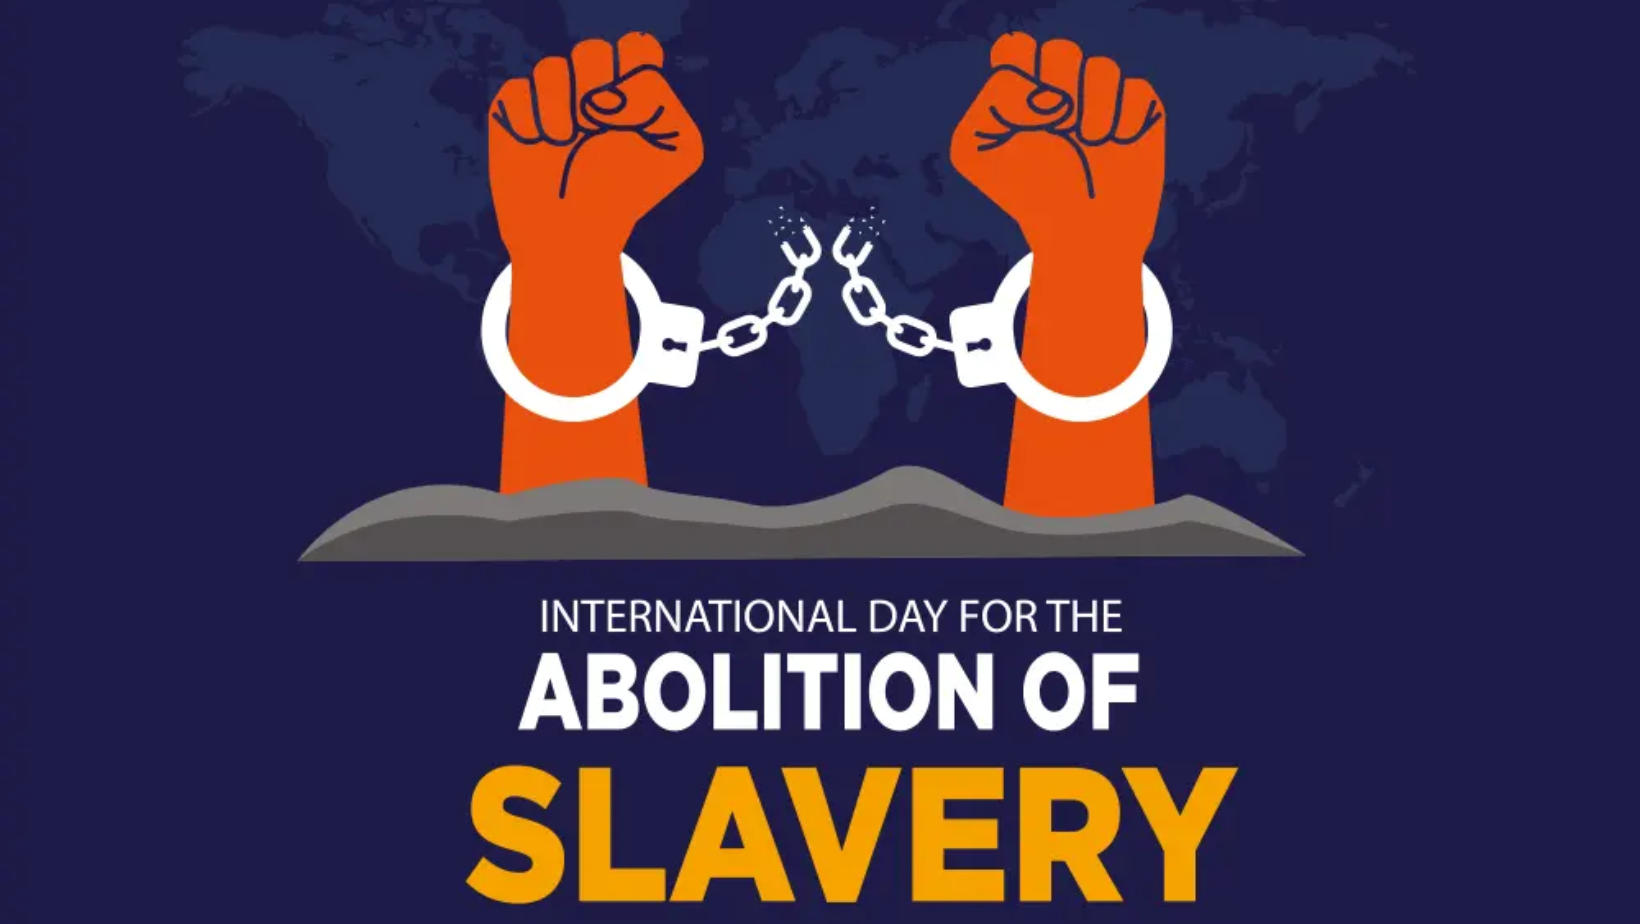 International Day for the abolition of Slavery